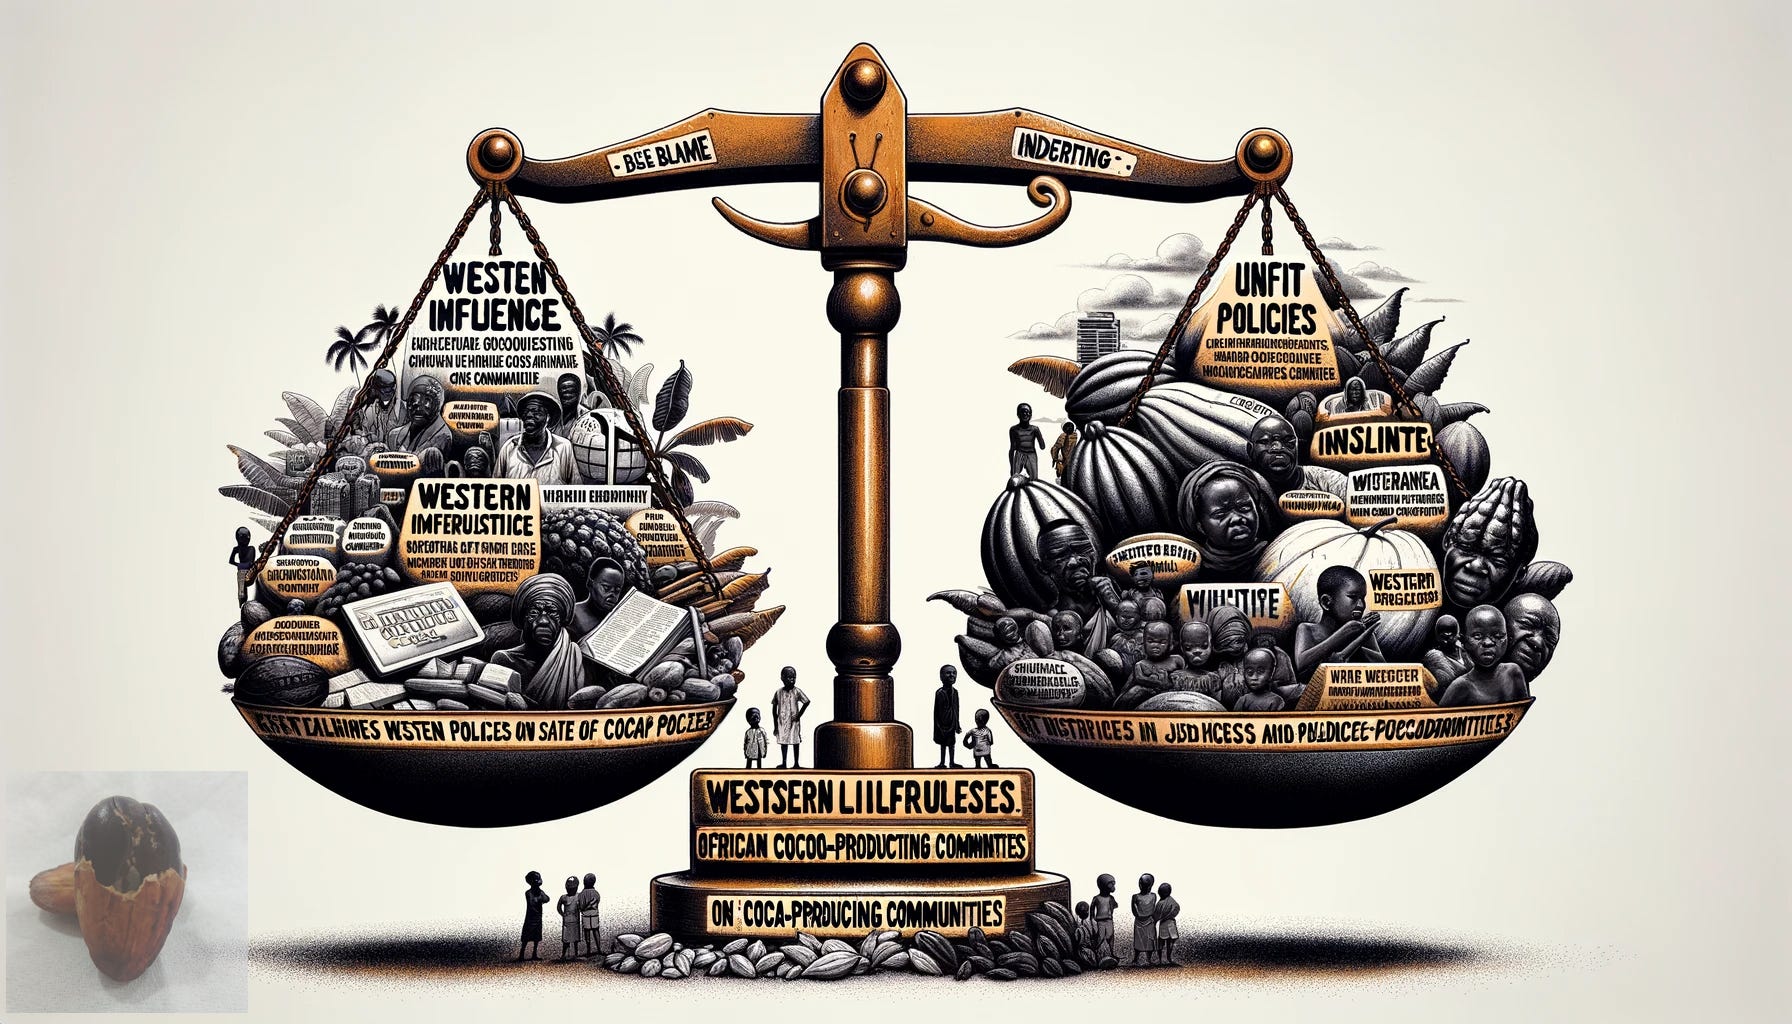 An evocative image portraying a weight scale as a metaphor for Western influence on cocoa-producing communities. On the left side of the scale, symbols of Western impact are shown, including corporate logos, Western media broadcasts, and representations of policies, suggesting themes of external pressure and misunderstanding. This side visually conveys a narrative of blame, insult, and unfit policies affecting cocoa producers. On the right side of the scale, the effects on African cocoa-producing communities are depicted. The imagery includes cocoa farmers confronted with challenges, a general sense of injustice, and children in the community facing undeserved resentment. This side poignantly illustrates the harsh realities and emotional struggles these communities endure due to Western influences. The overall tone of the image is poignant and thought-provoking, aiming to highlight the complex and often detrimental effects of Western perspectives on the lives and livelihoods of African cocoa farmers